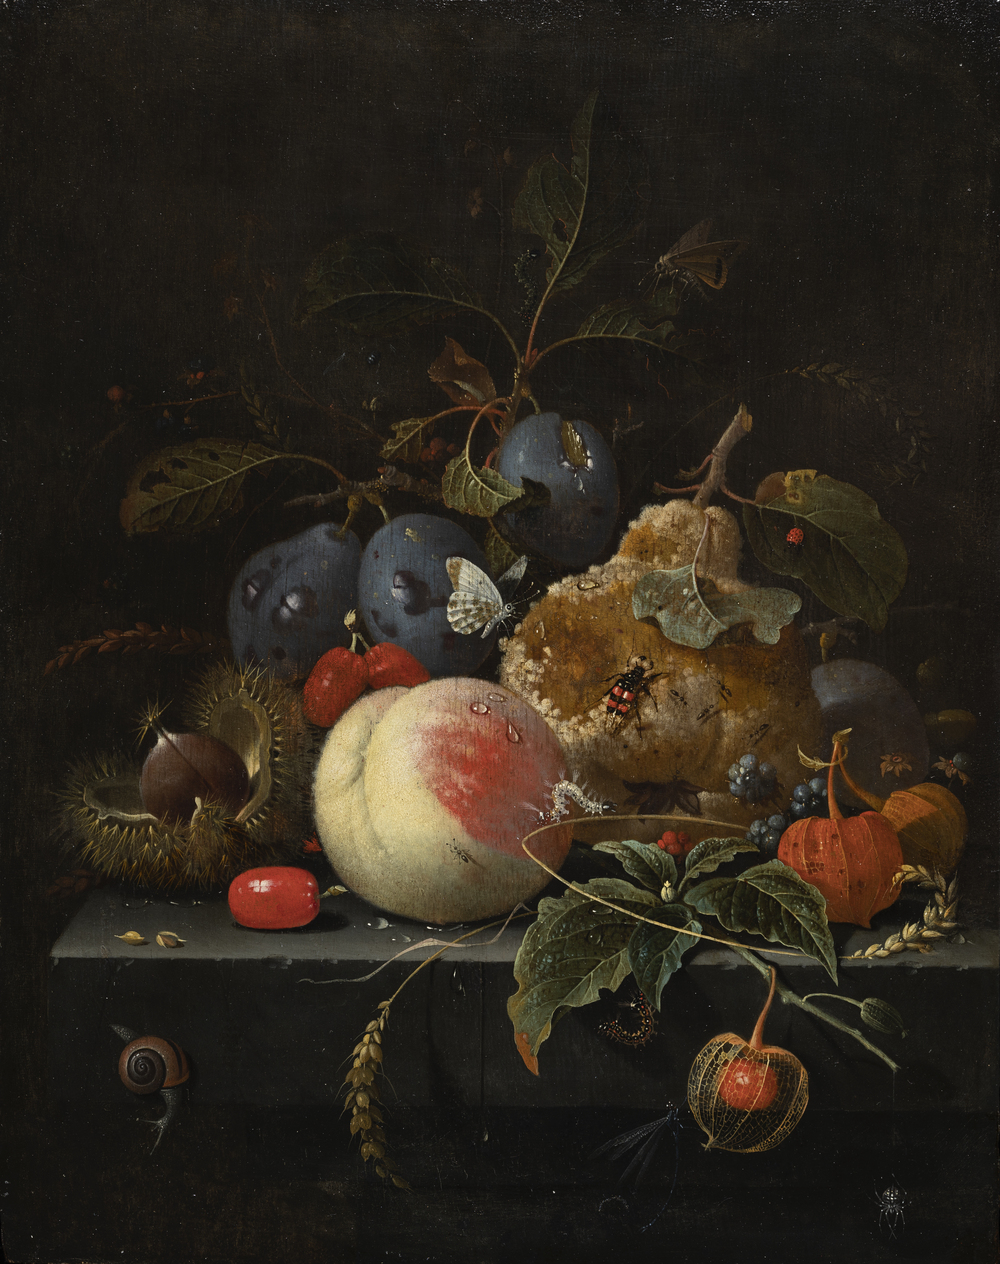 Still life with rotting fruit and nuts on a stone ledge